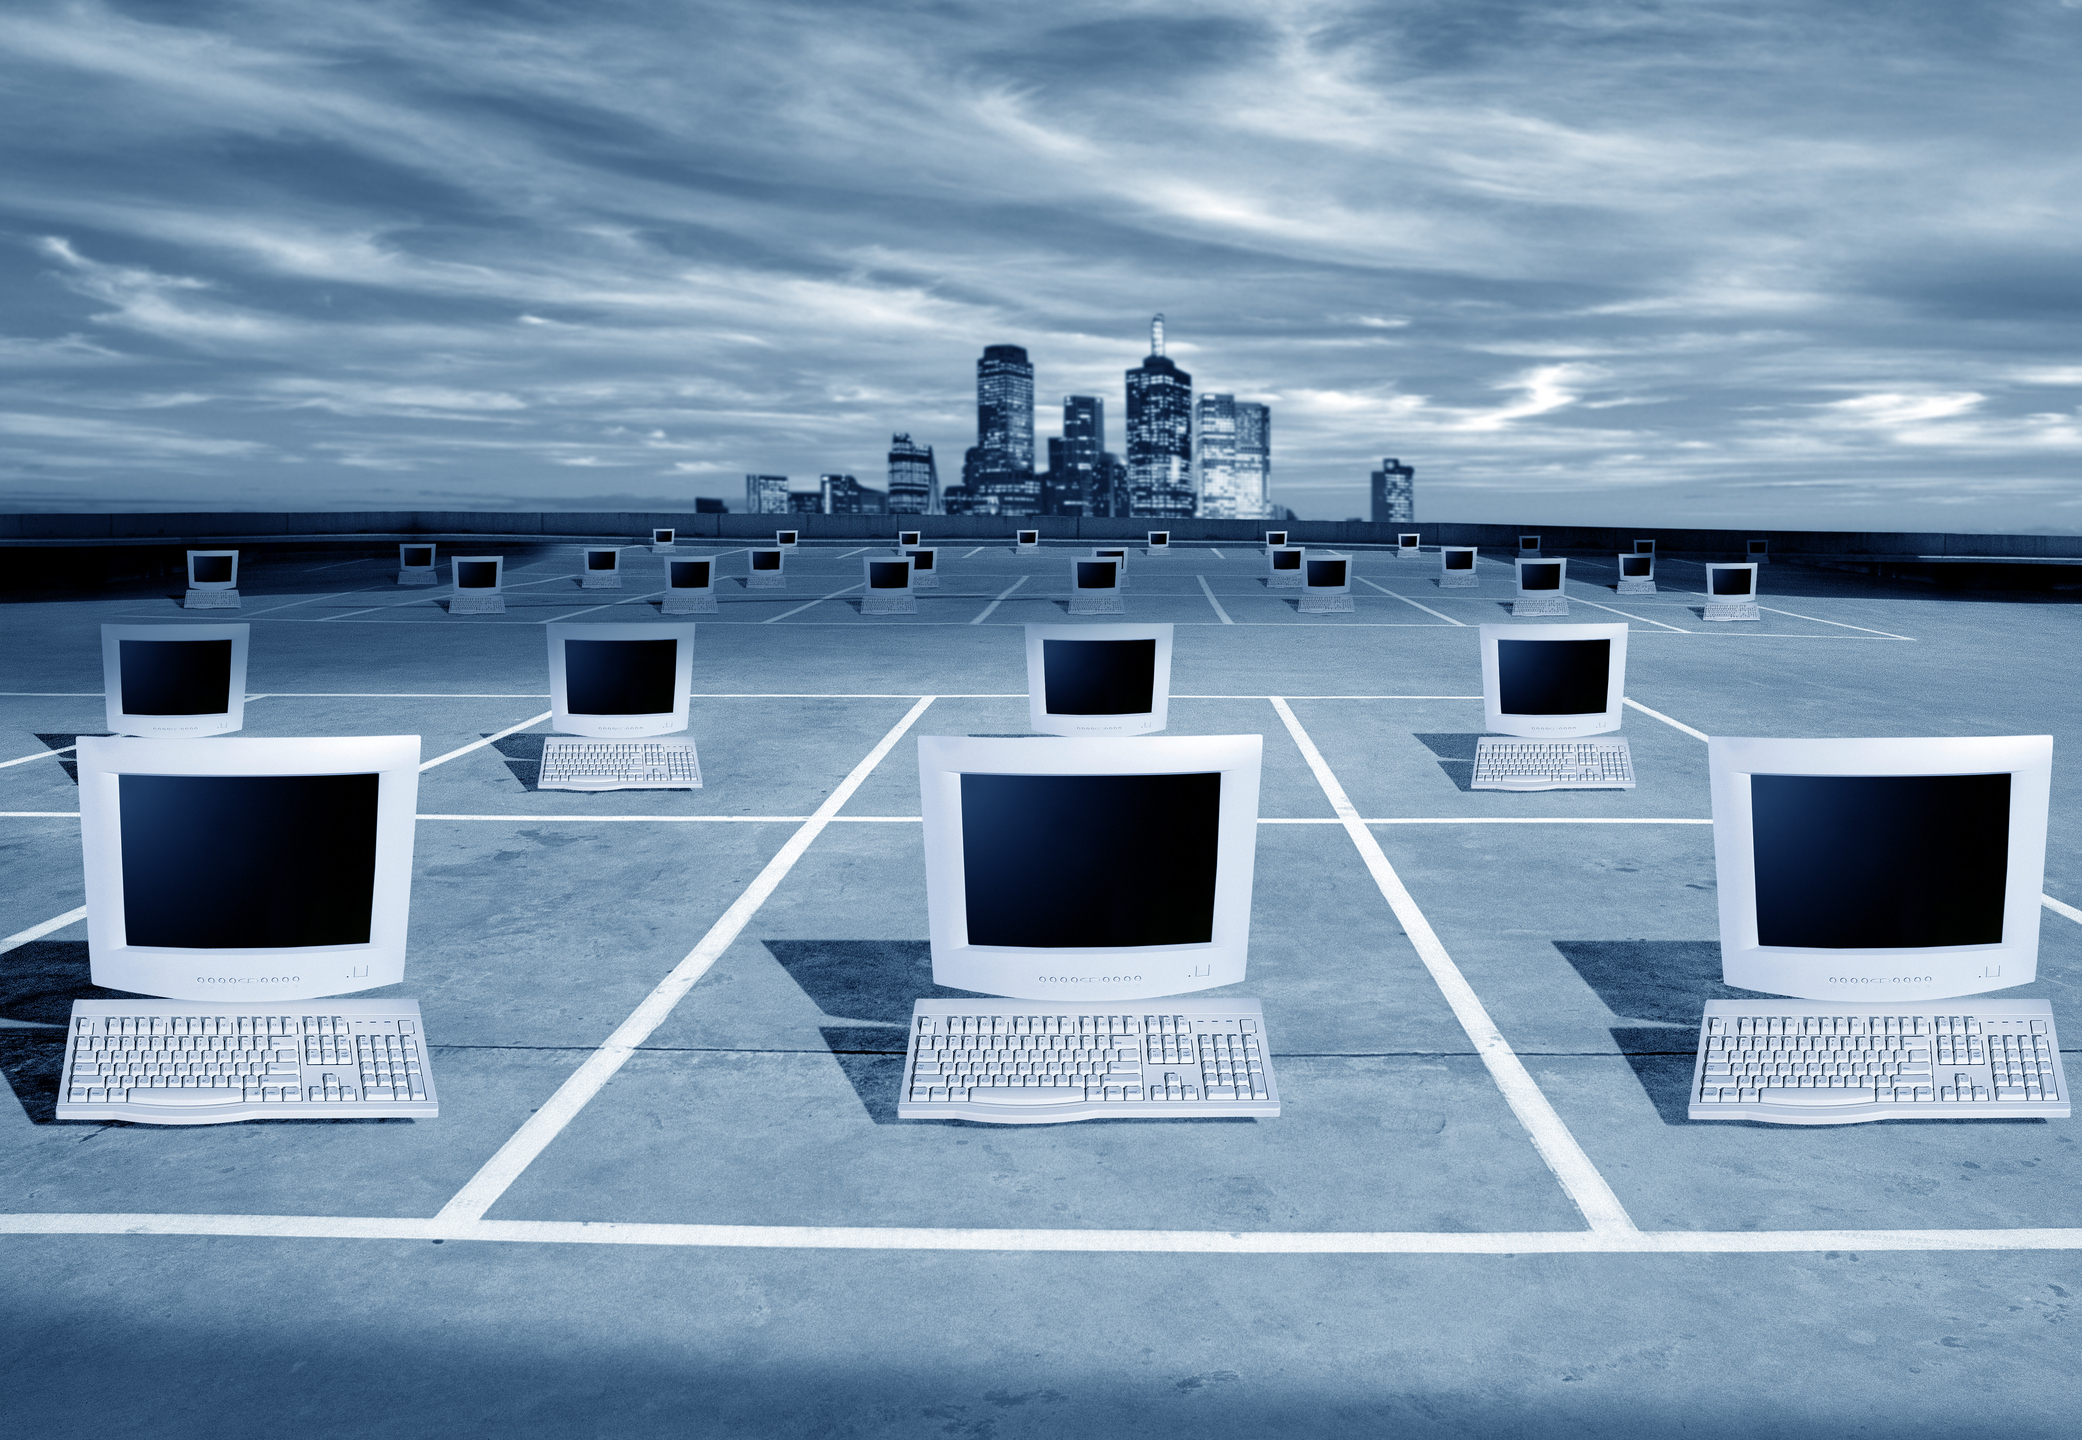 PCs on a grid in front of a city skyline.